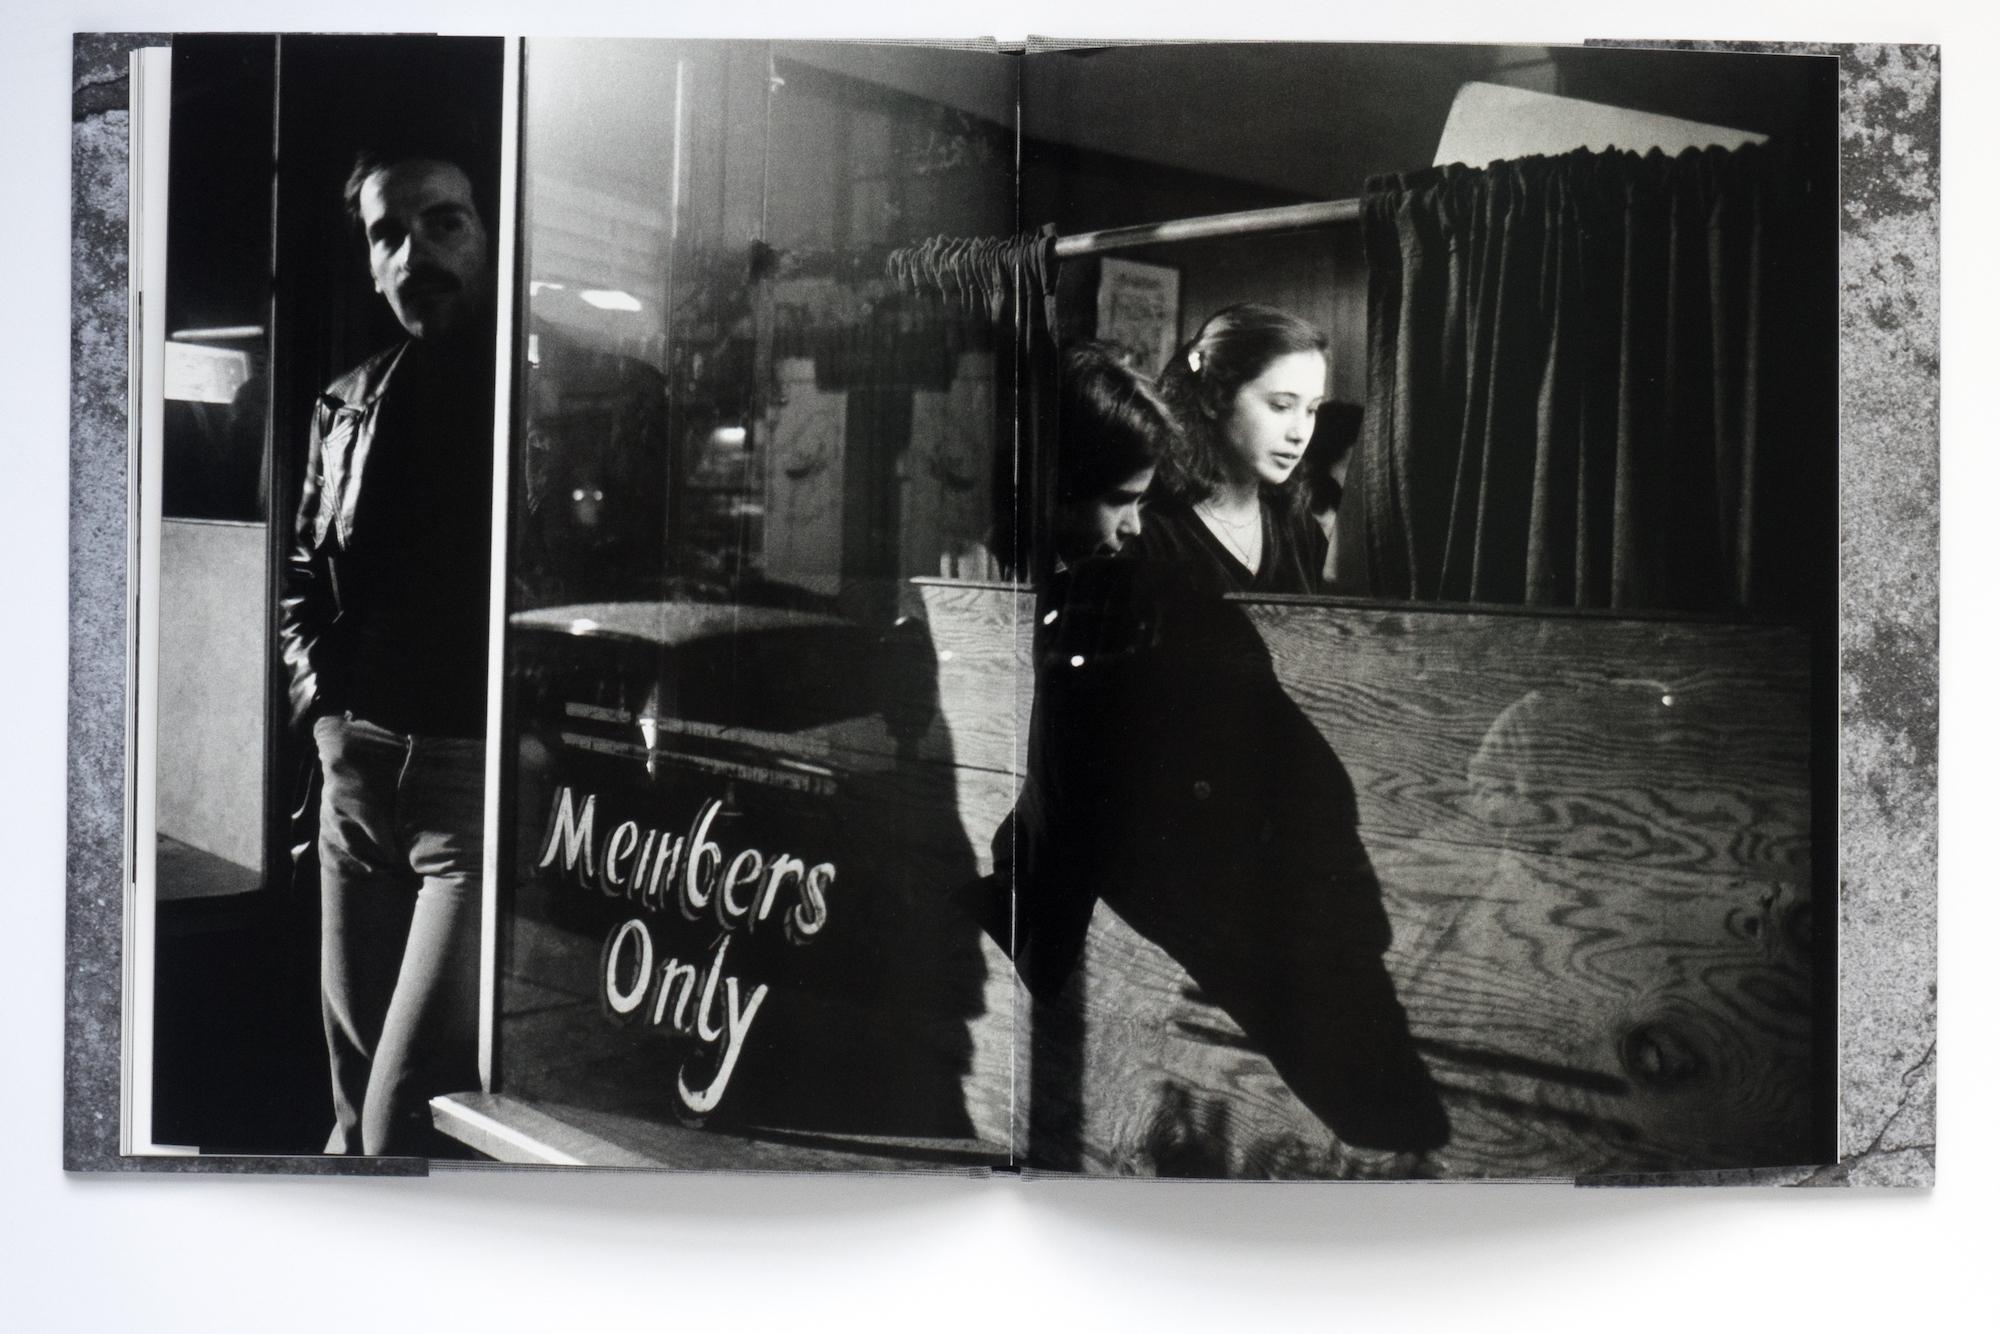 Prince Street Girls Books - Spread from Prince Street Girls book published by TBW, 2017